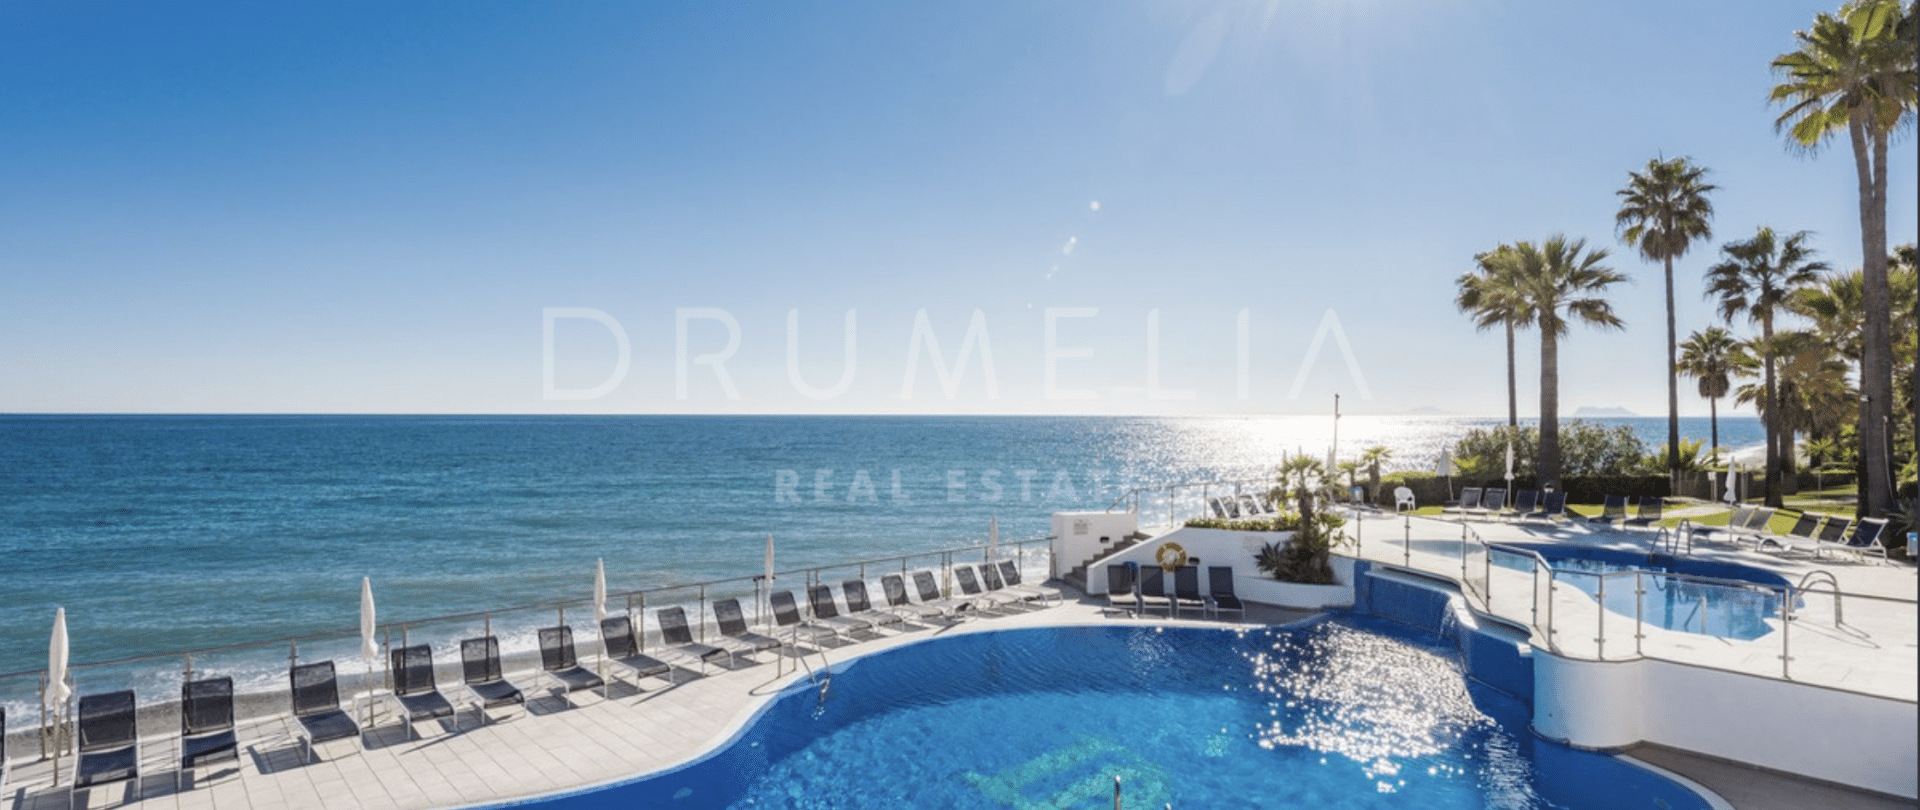 Immaculate renovated frontline beach penthouse with open sea in Dominion Beach, Estepona